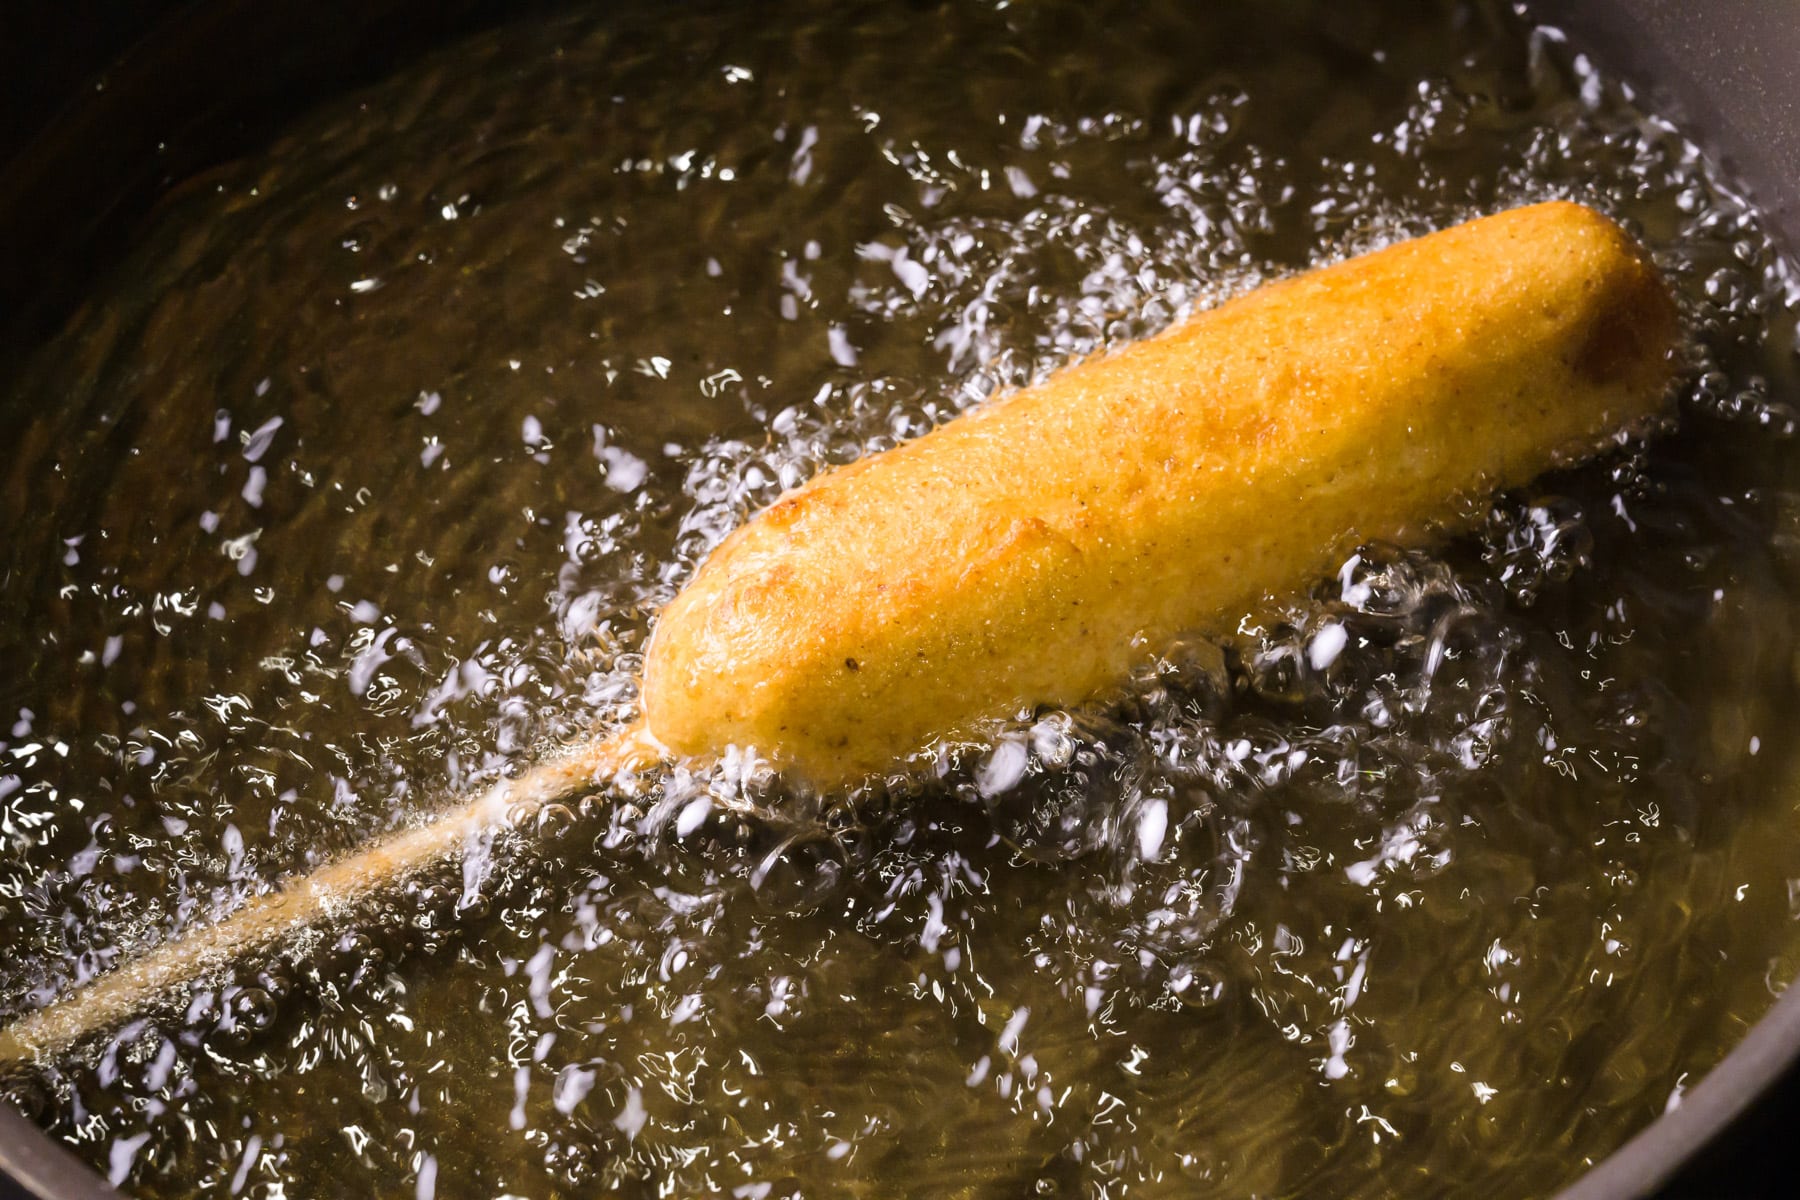 A corn dog is frying in hot oil in a skillet.